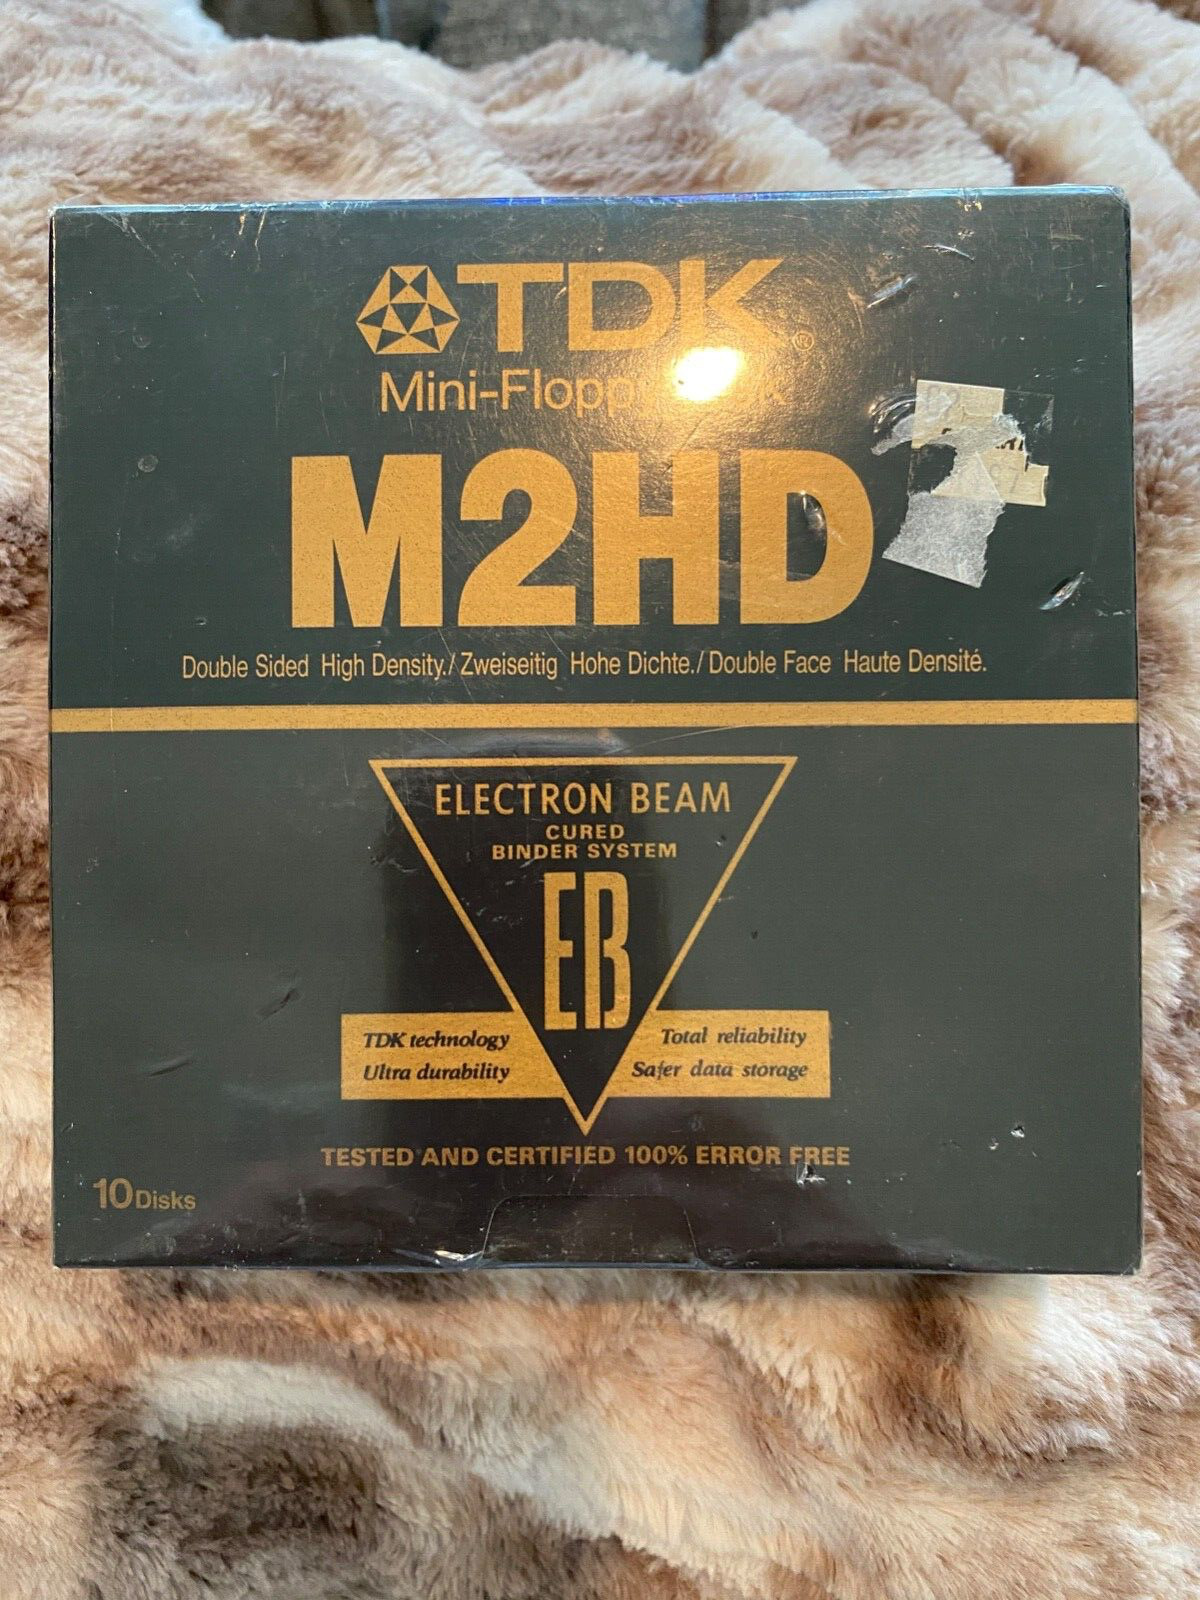 New TDK MF-2HD Micro Floppy Disk 10 Disks Double Sided High Density 